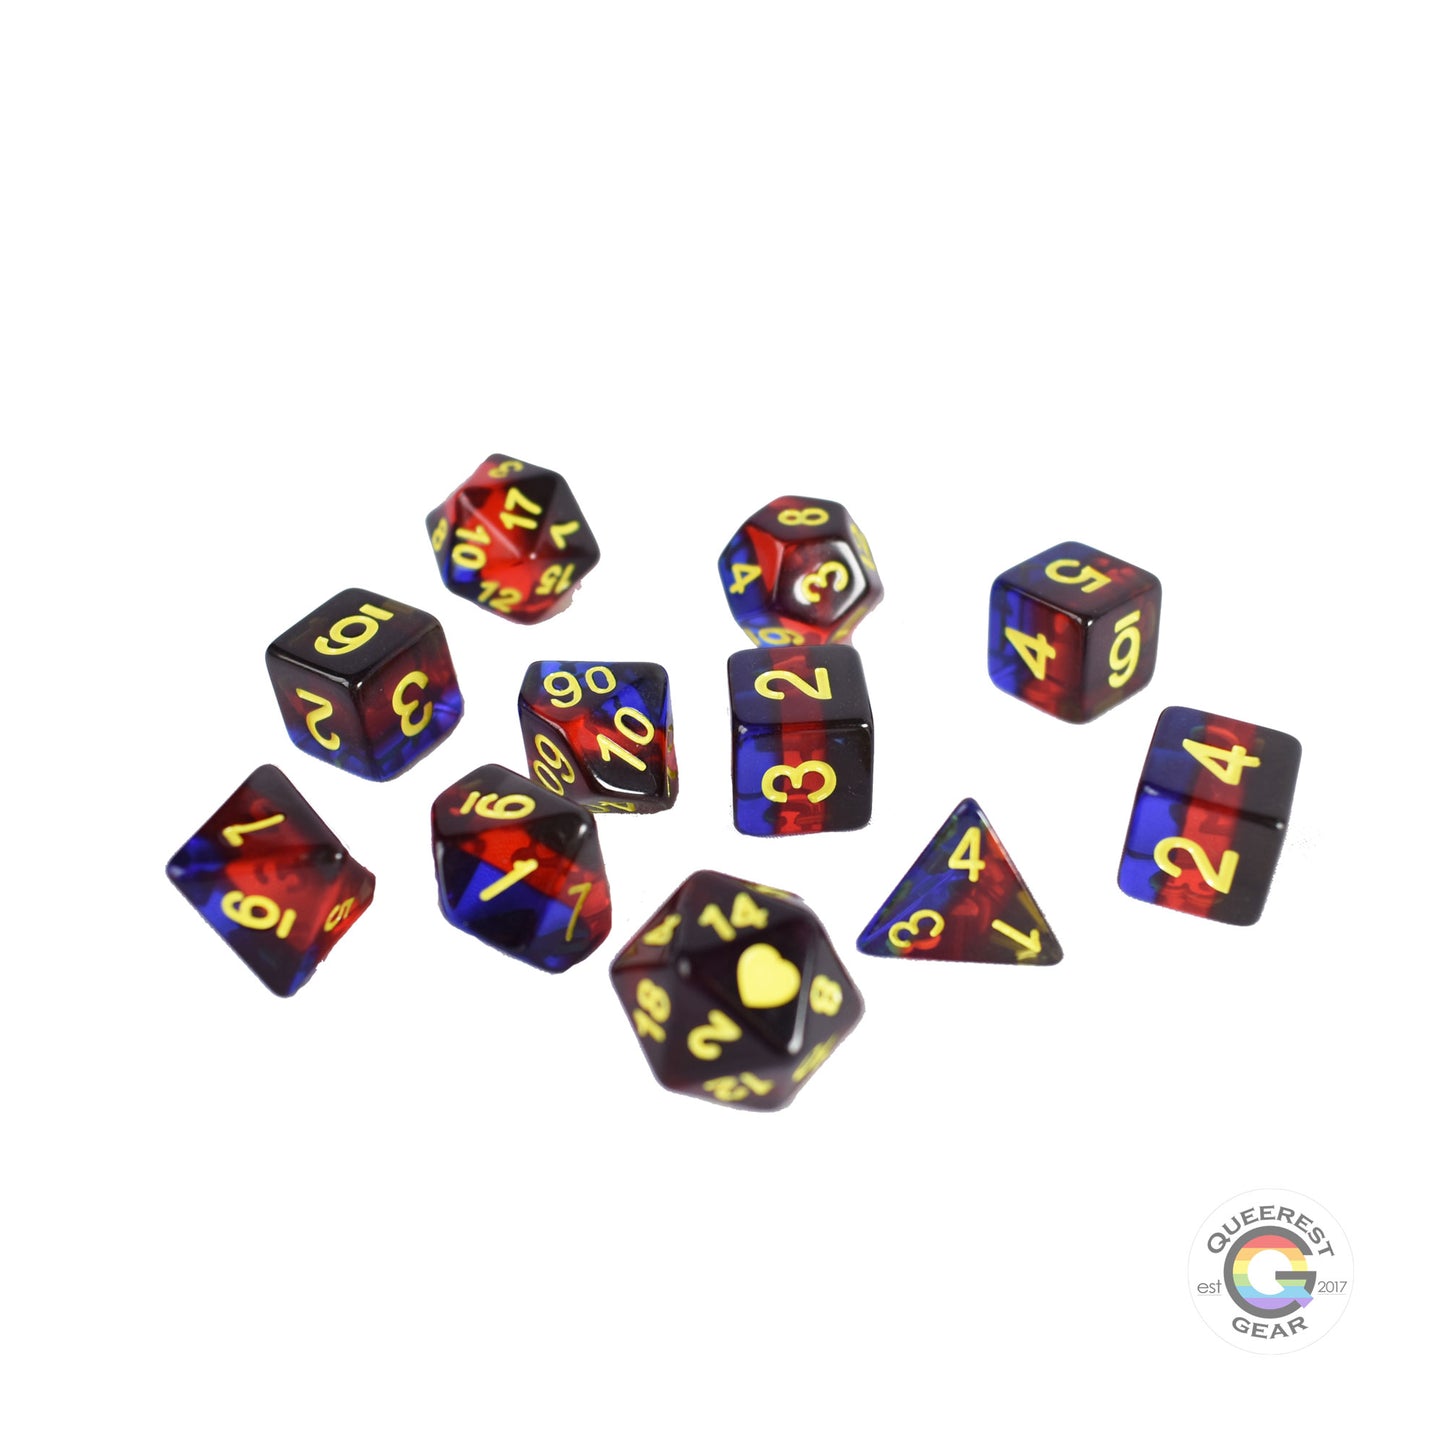 11 piece set of polyhedral dice scattered on a white background. They are transparent and colored in the stripes of the polyamory flag with yellow ink